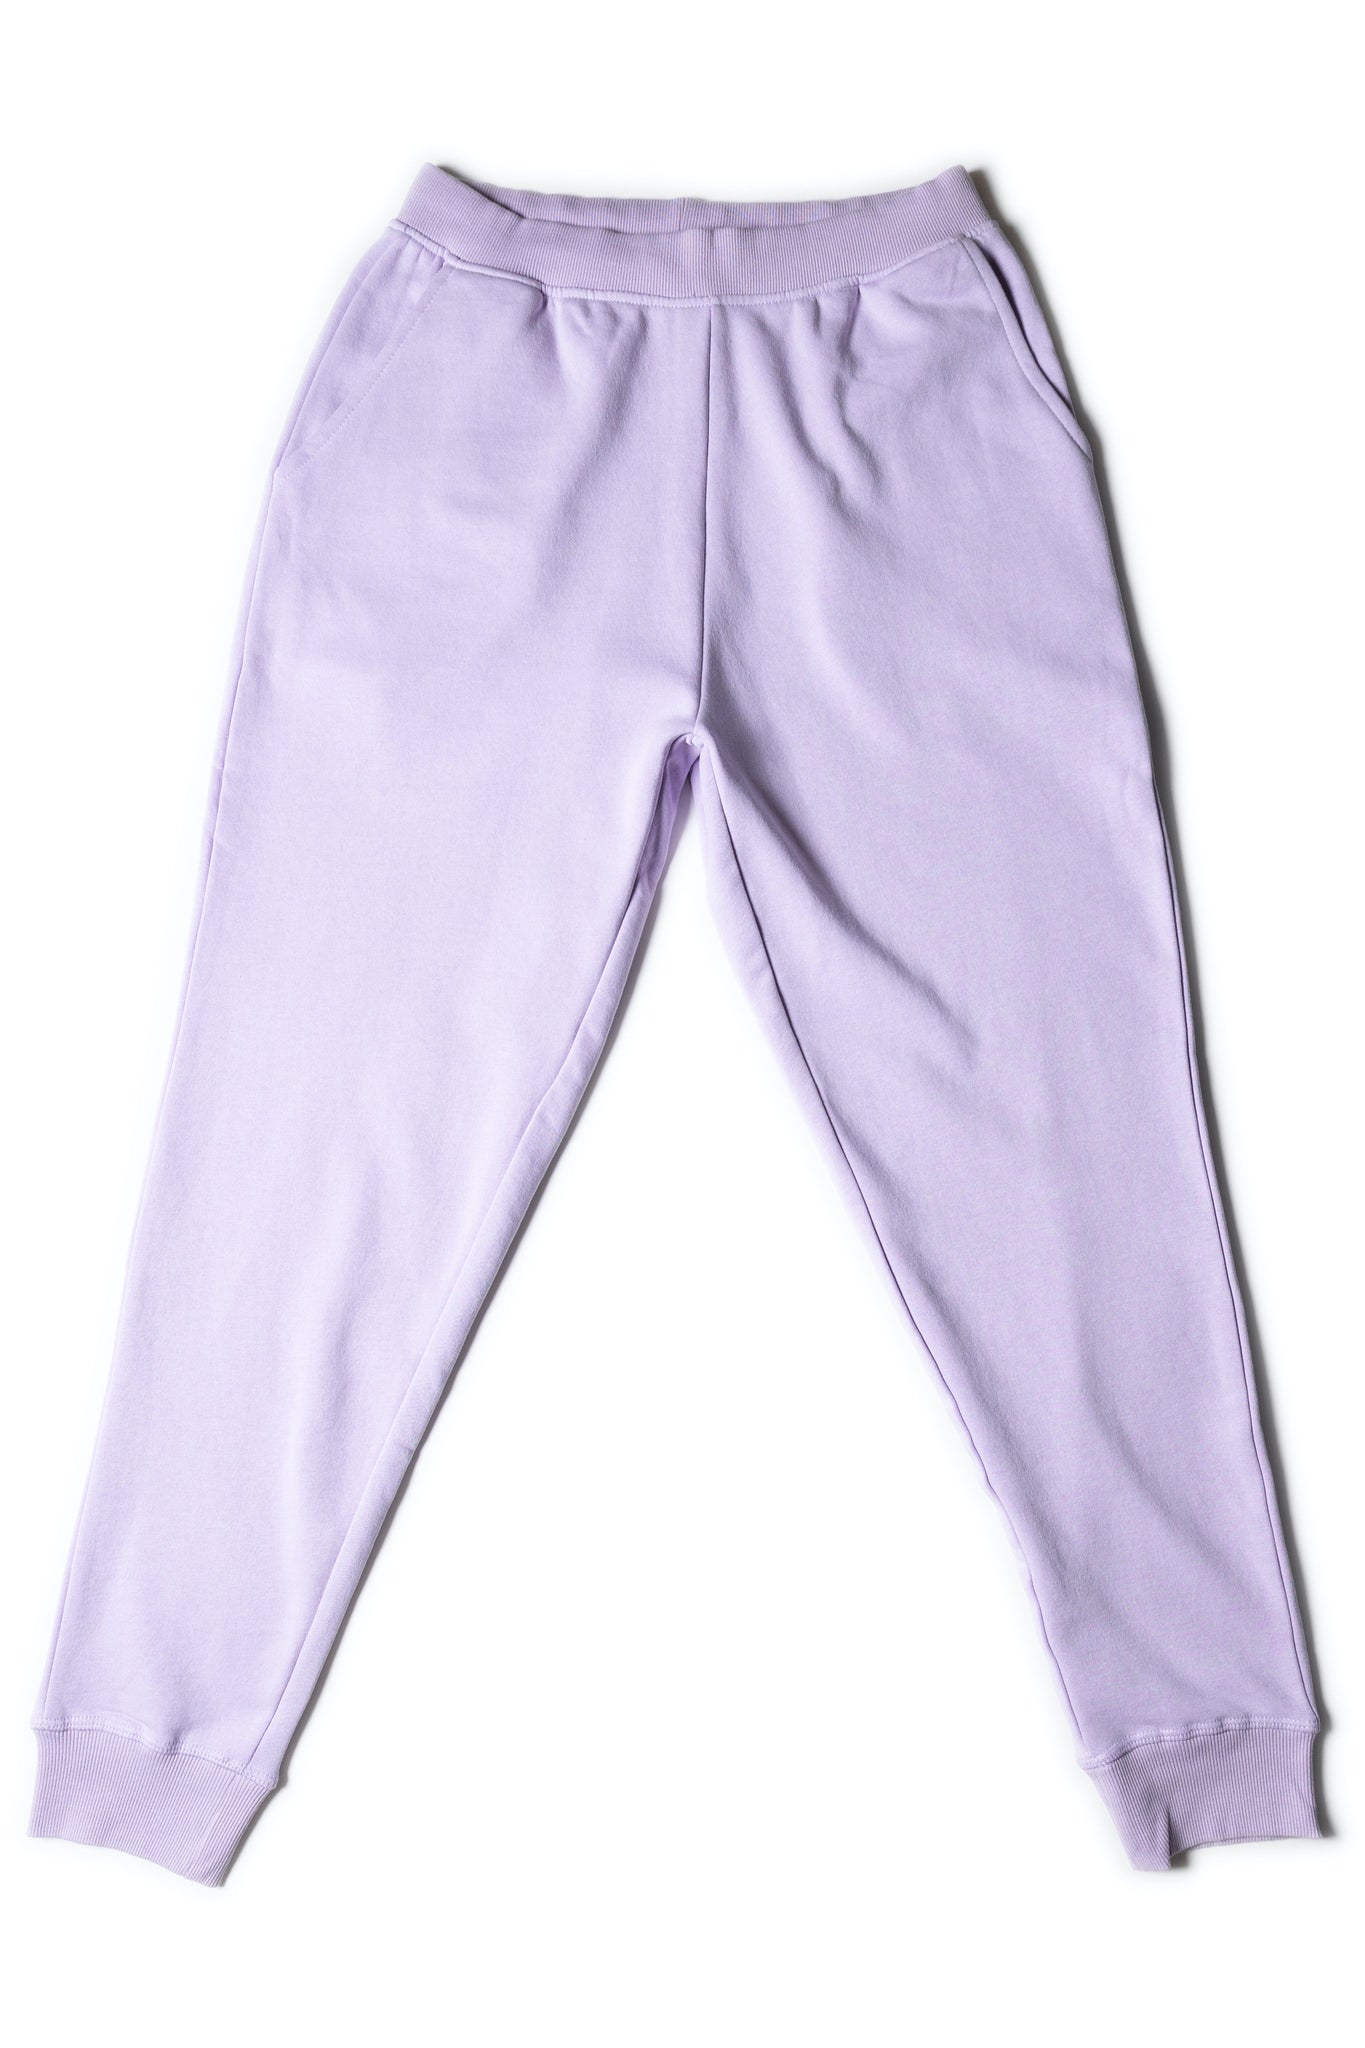 HERO - 5020R Youth Joggers - Lavender (Relaxed Fit) XL